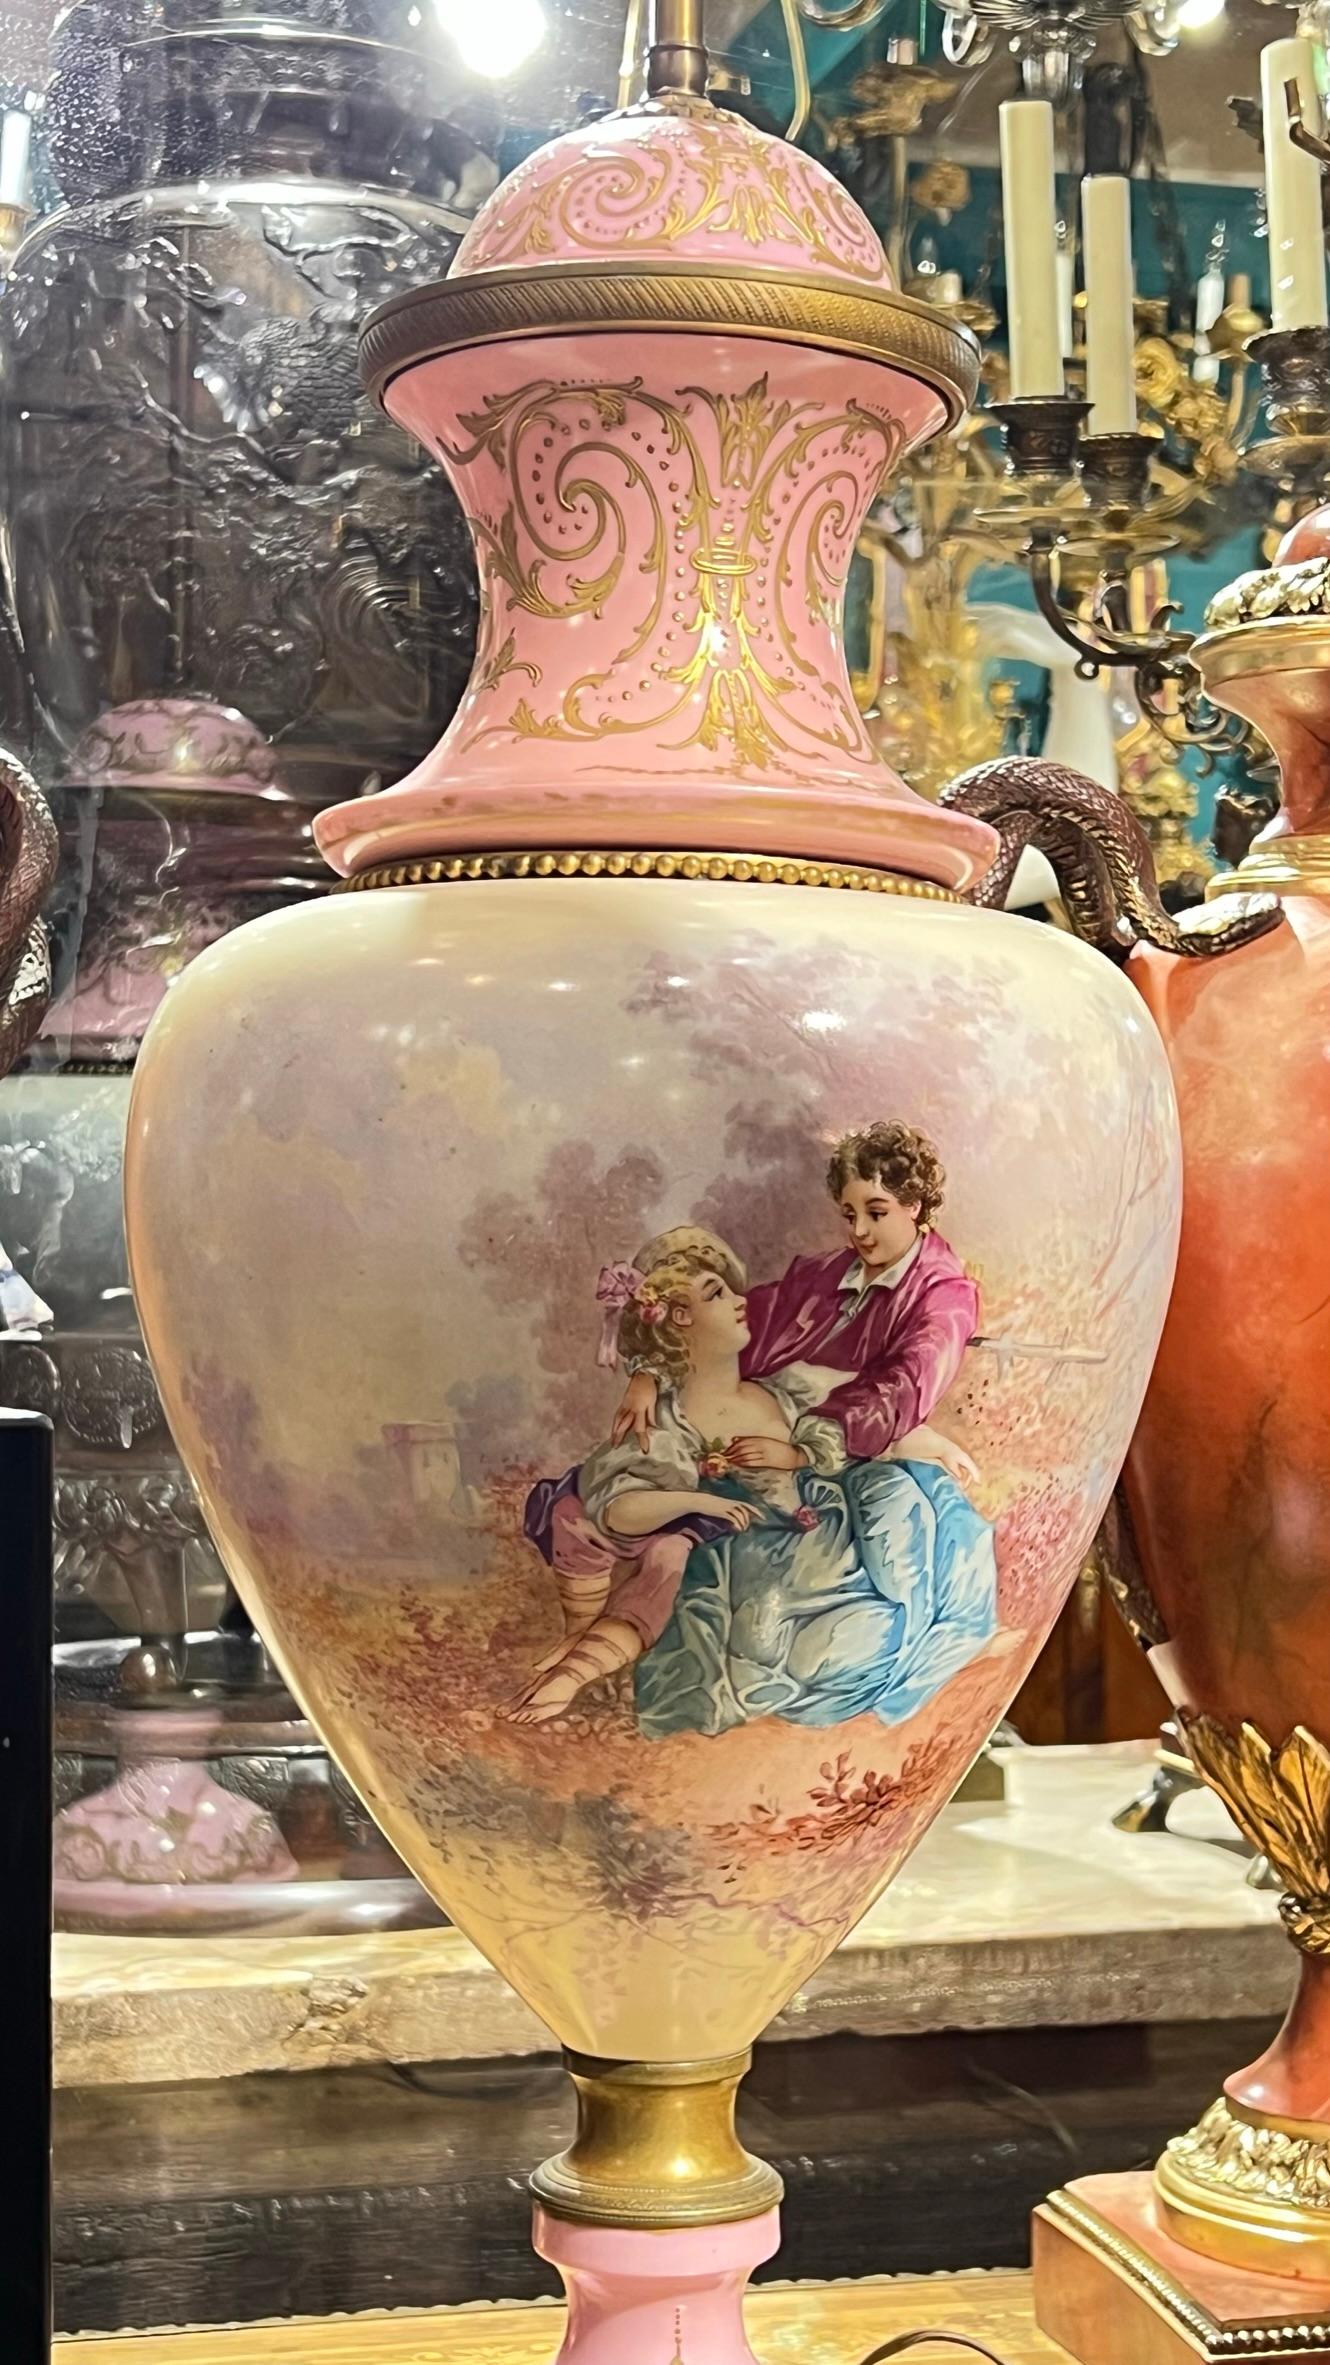 Bronze 19th Century French Hand-Painted Porcelain Urn-Form Table Lamp For Sale